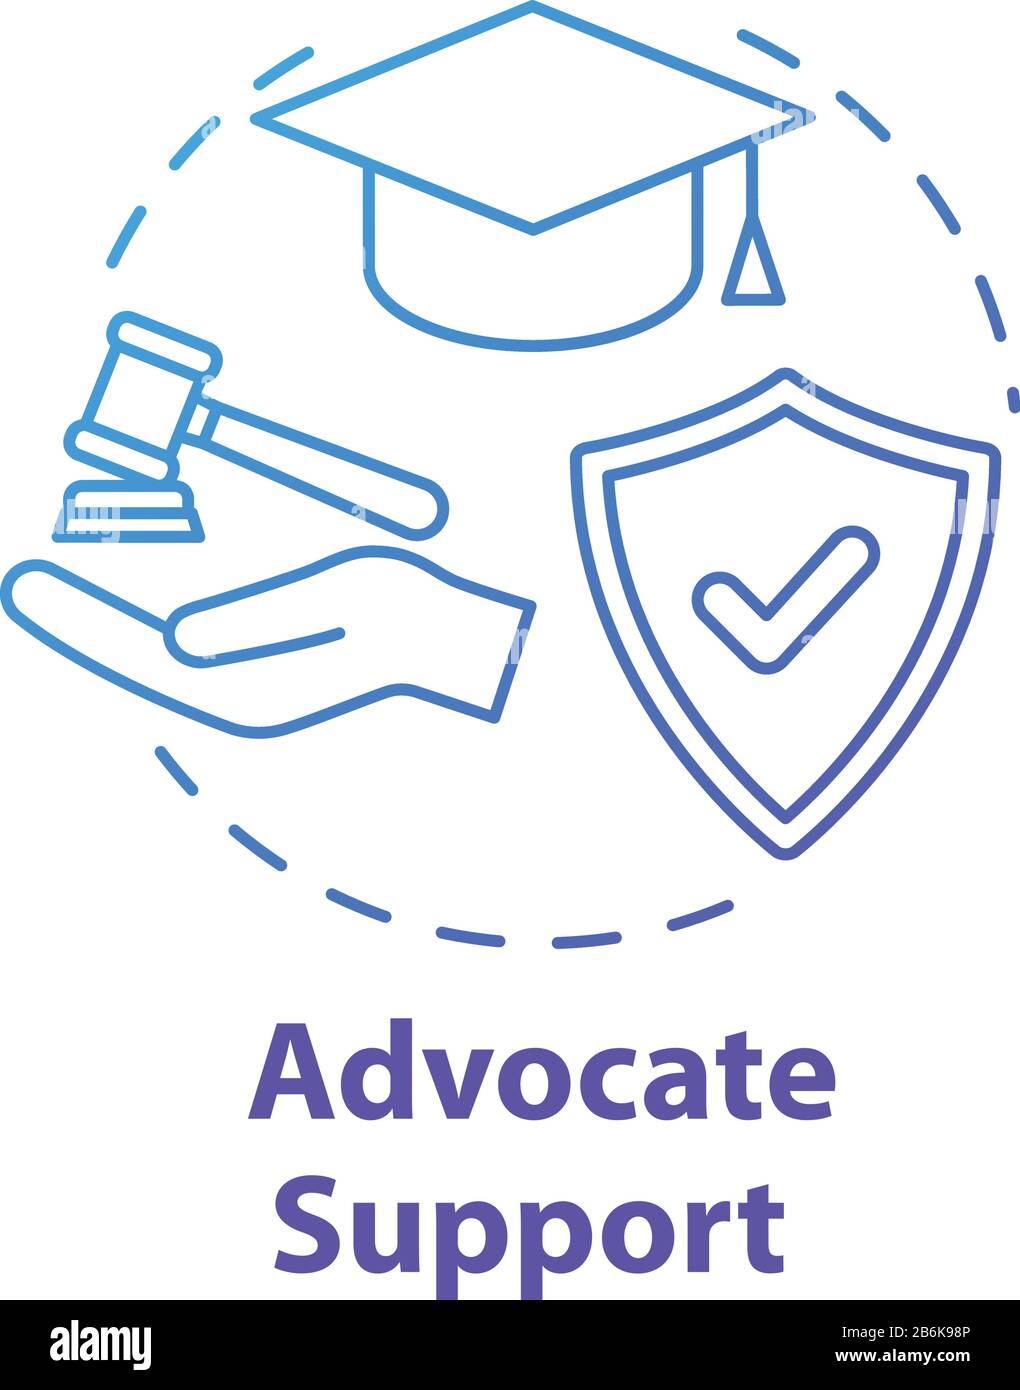 Advocate support concept icon. Legal assistance for students. Education contract. Legislation idea thin line illustration. Vector isolated outline RGB Stock Vector